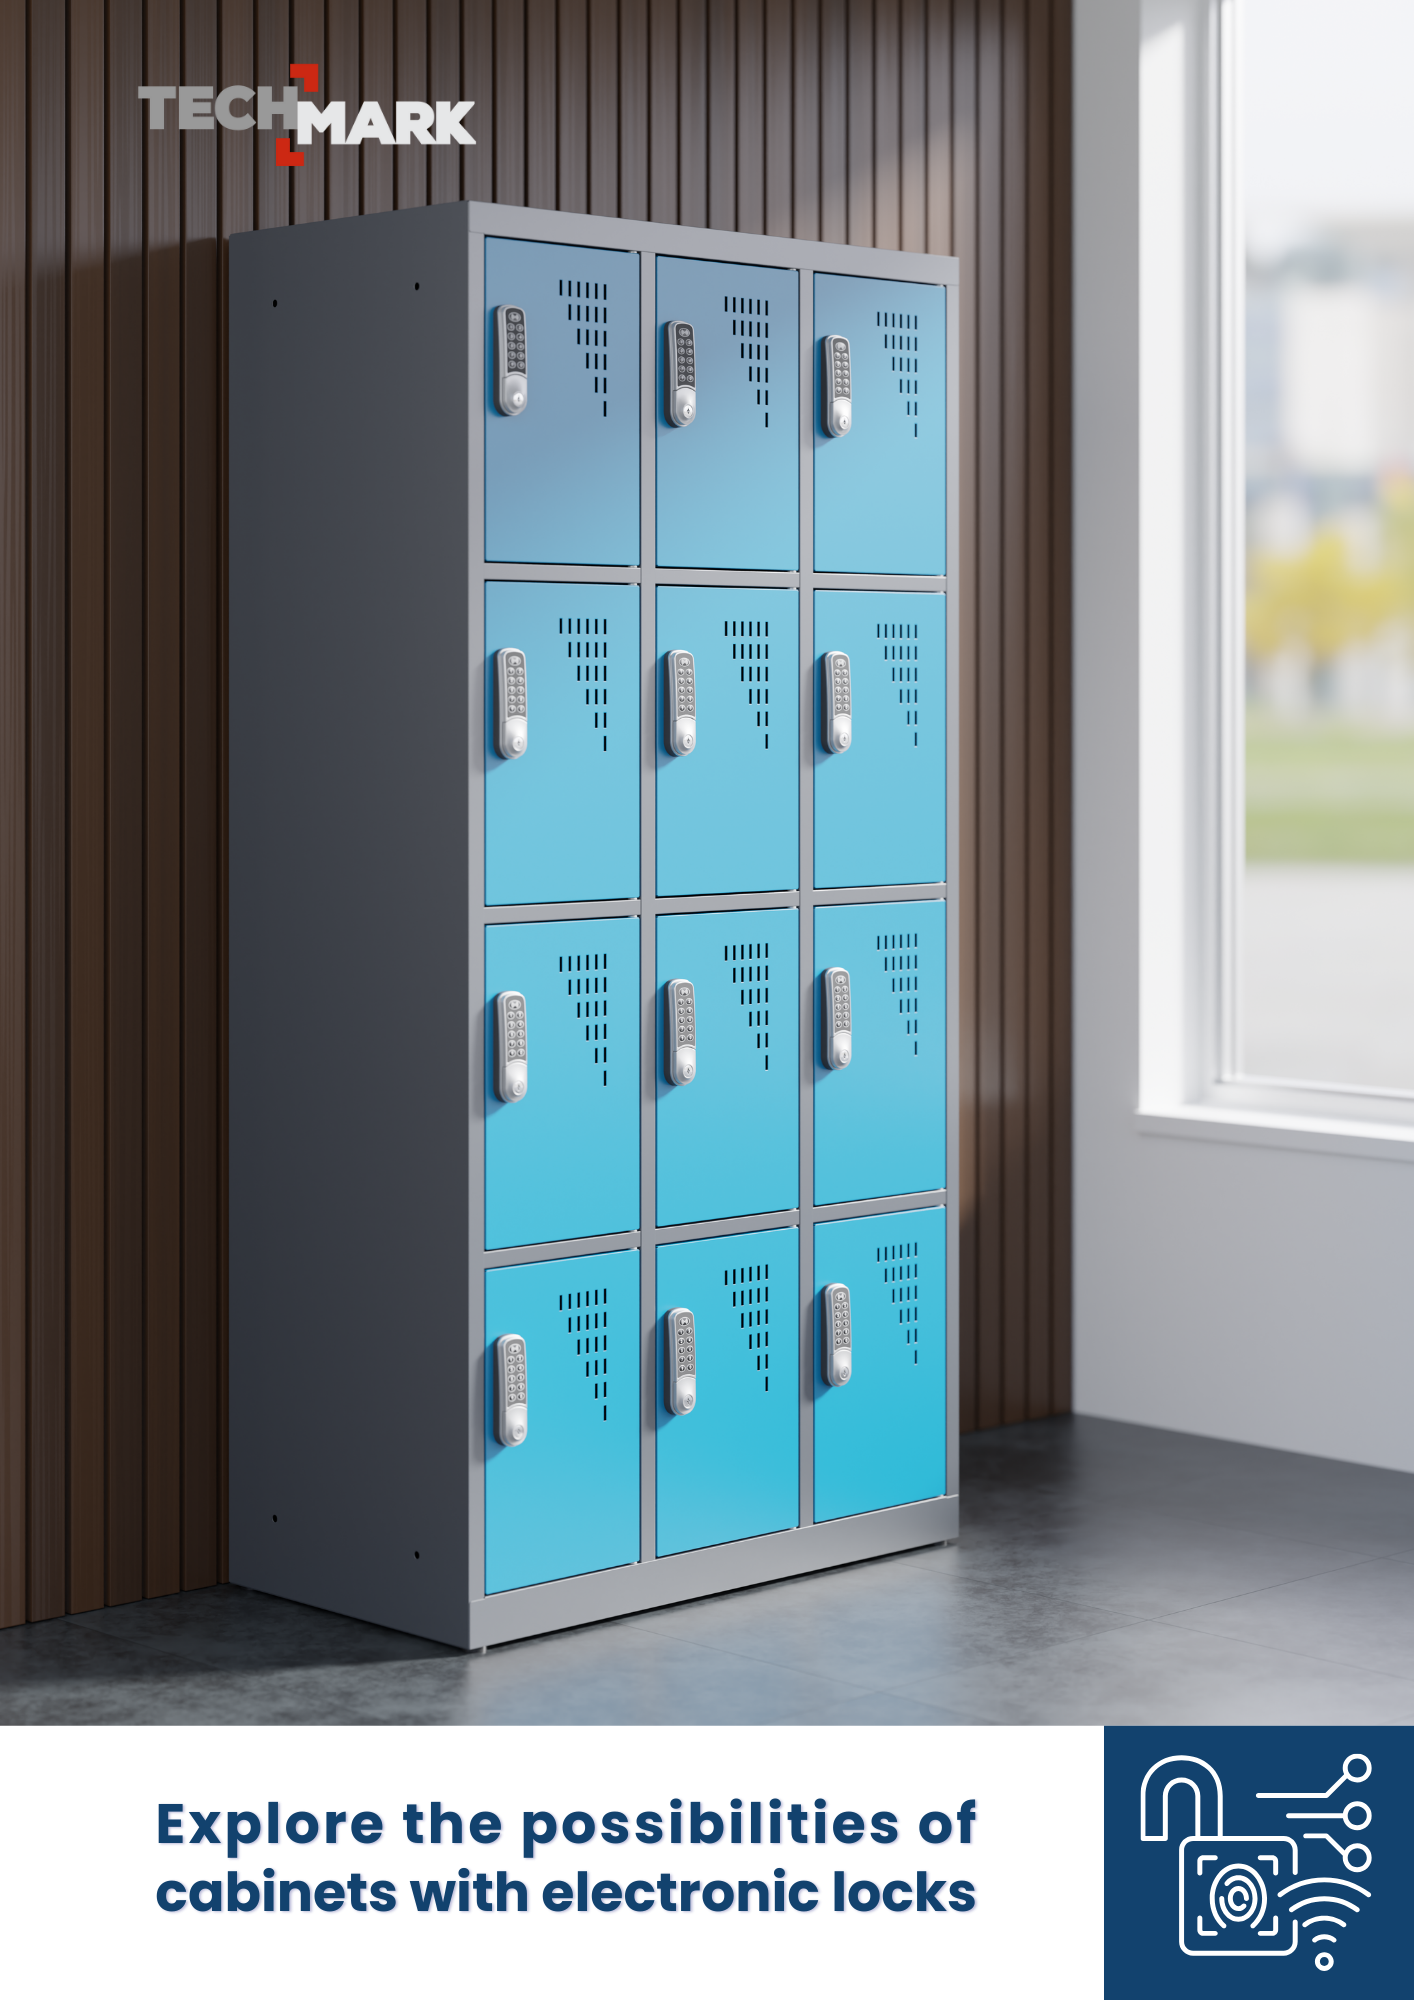 Techmark. Explore the possibilities of electronic lock cabinets.